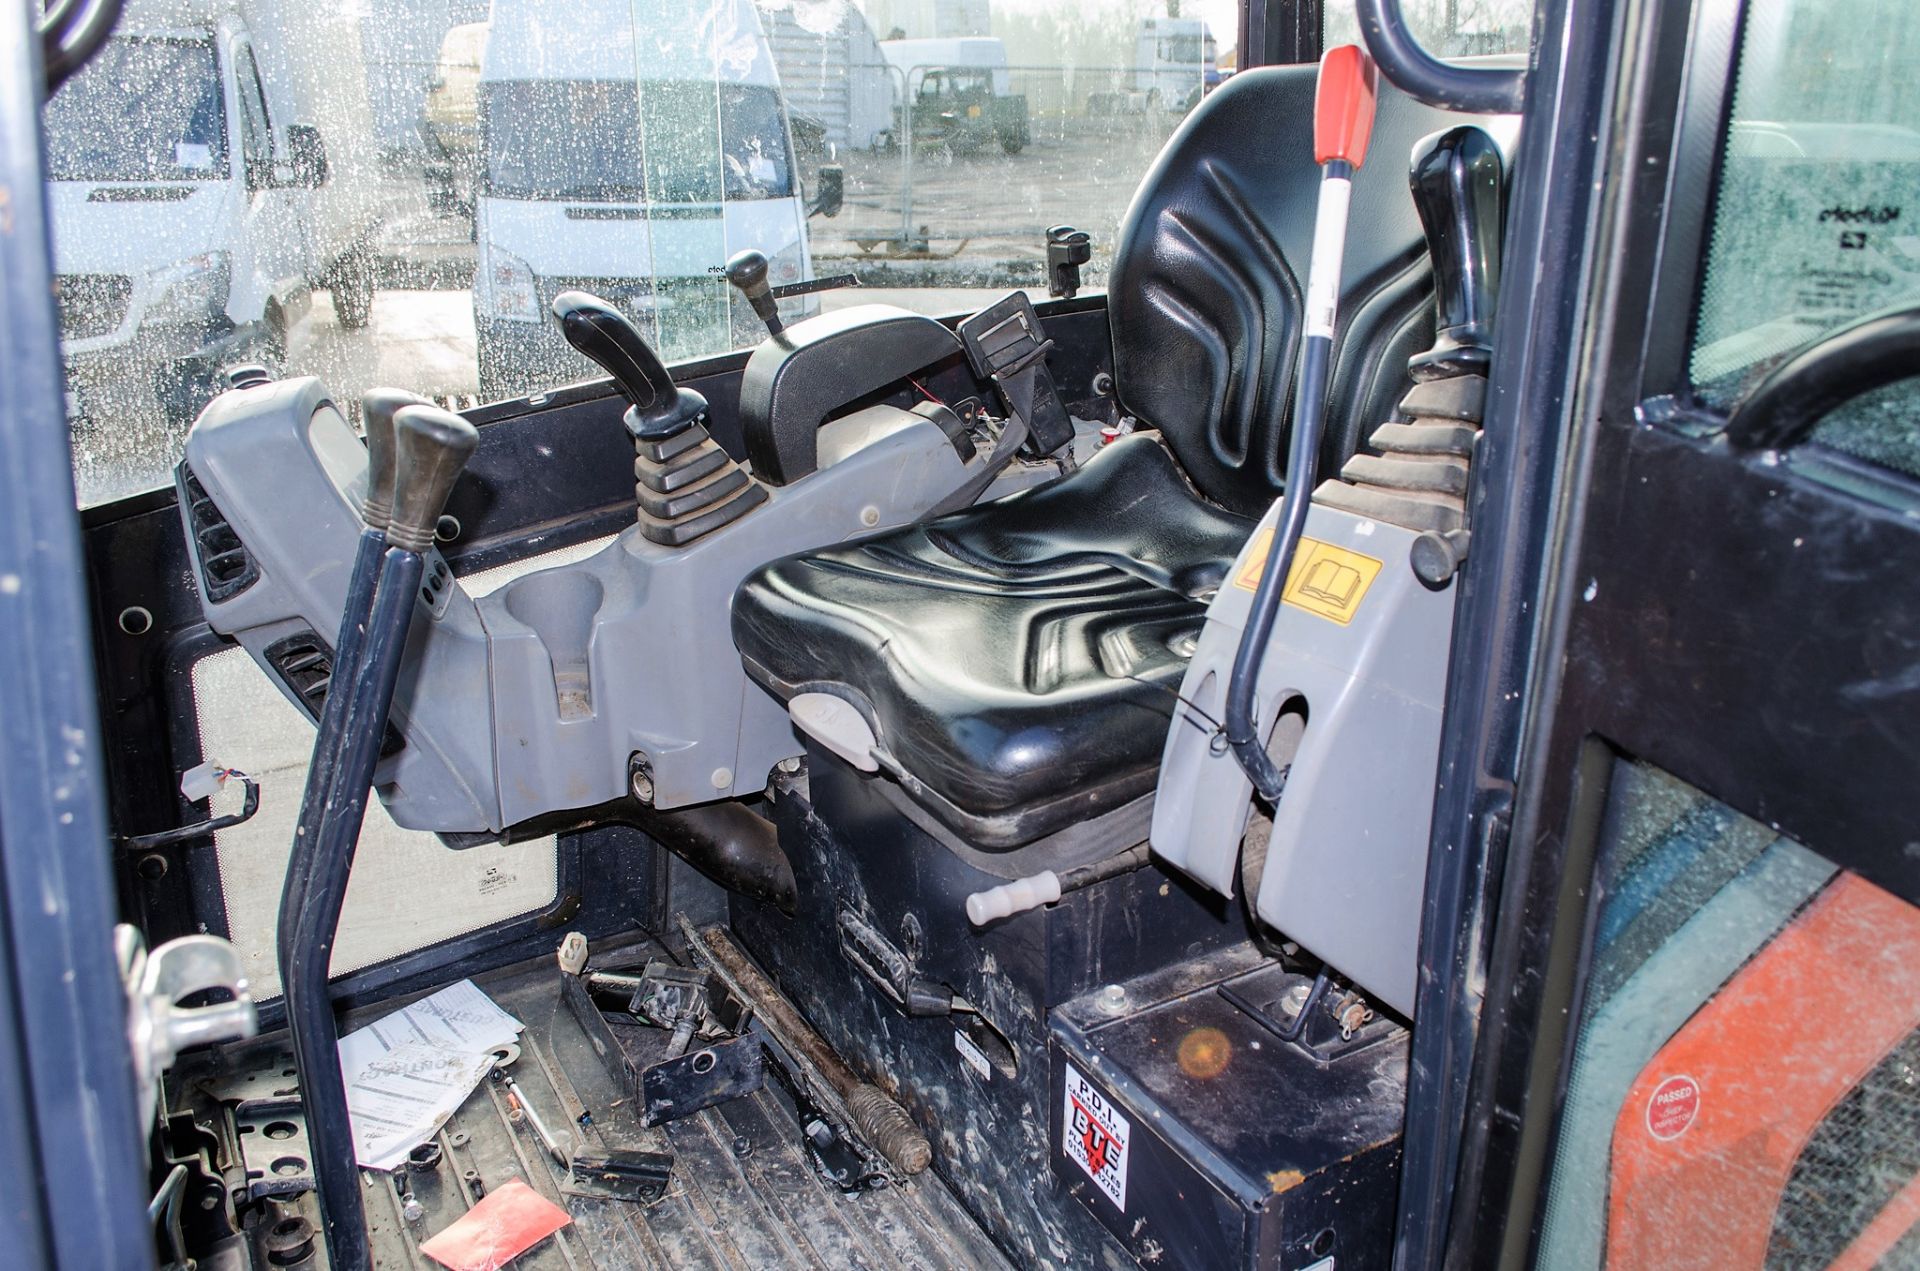 Kubota KX015-4 1.5 tonne rubber tracked excavator Year: 2014 S/N: 58181 Recorded Hours: 1616 - Image 17 of 21